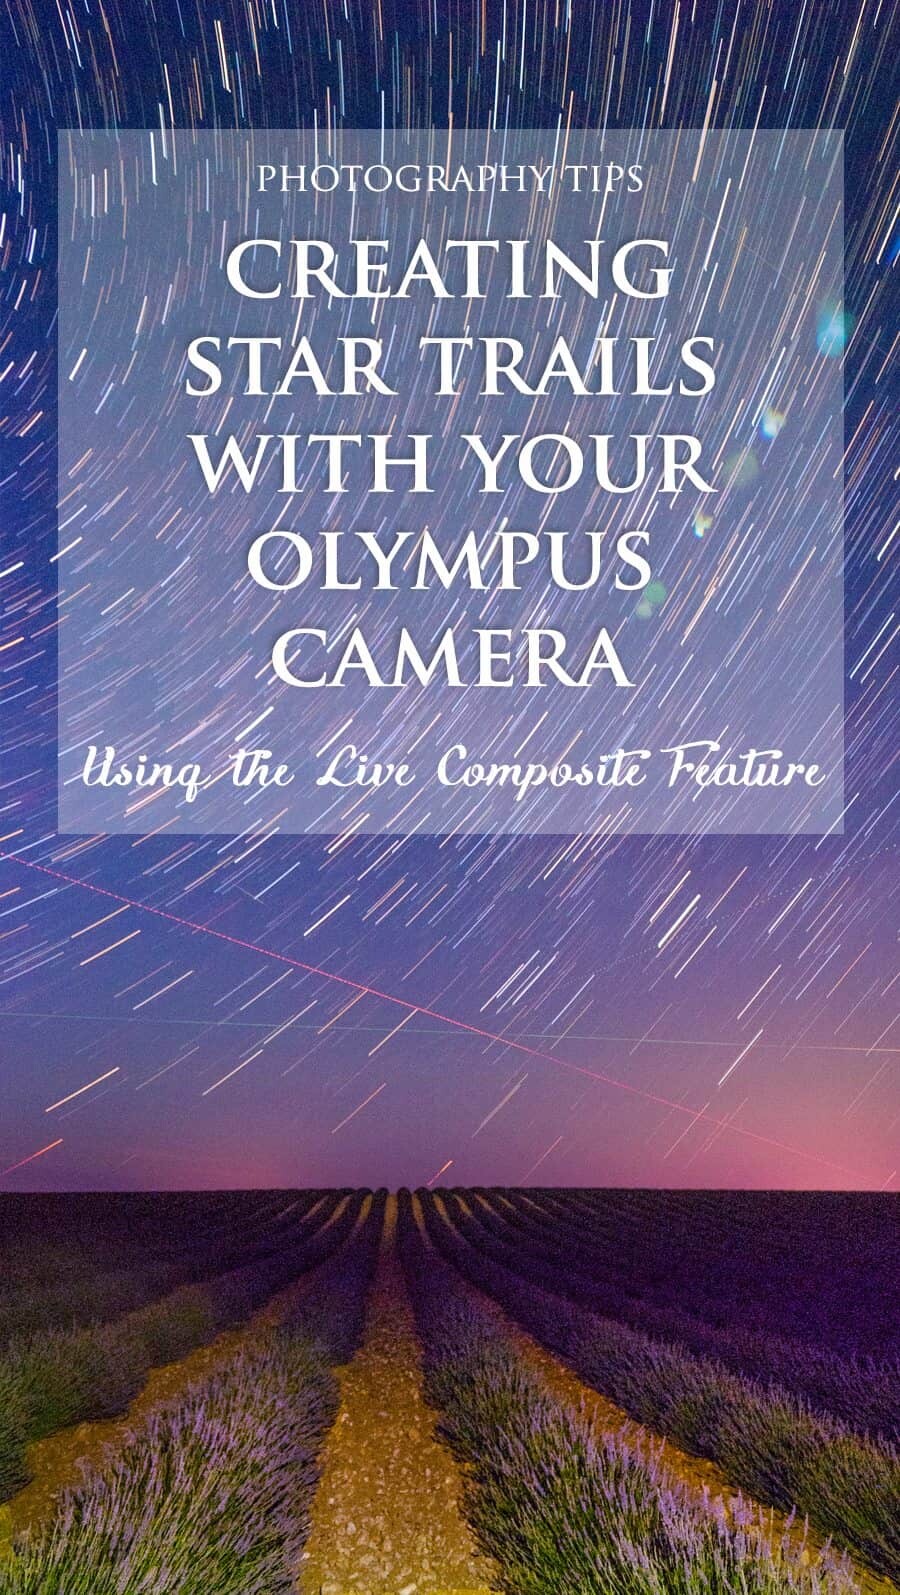 How to take Star Trail photos with Olympus camera